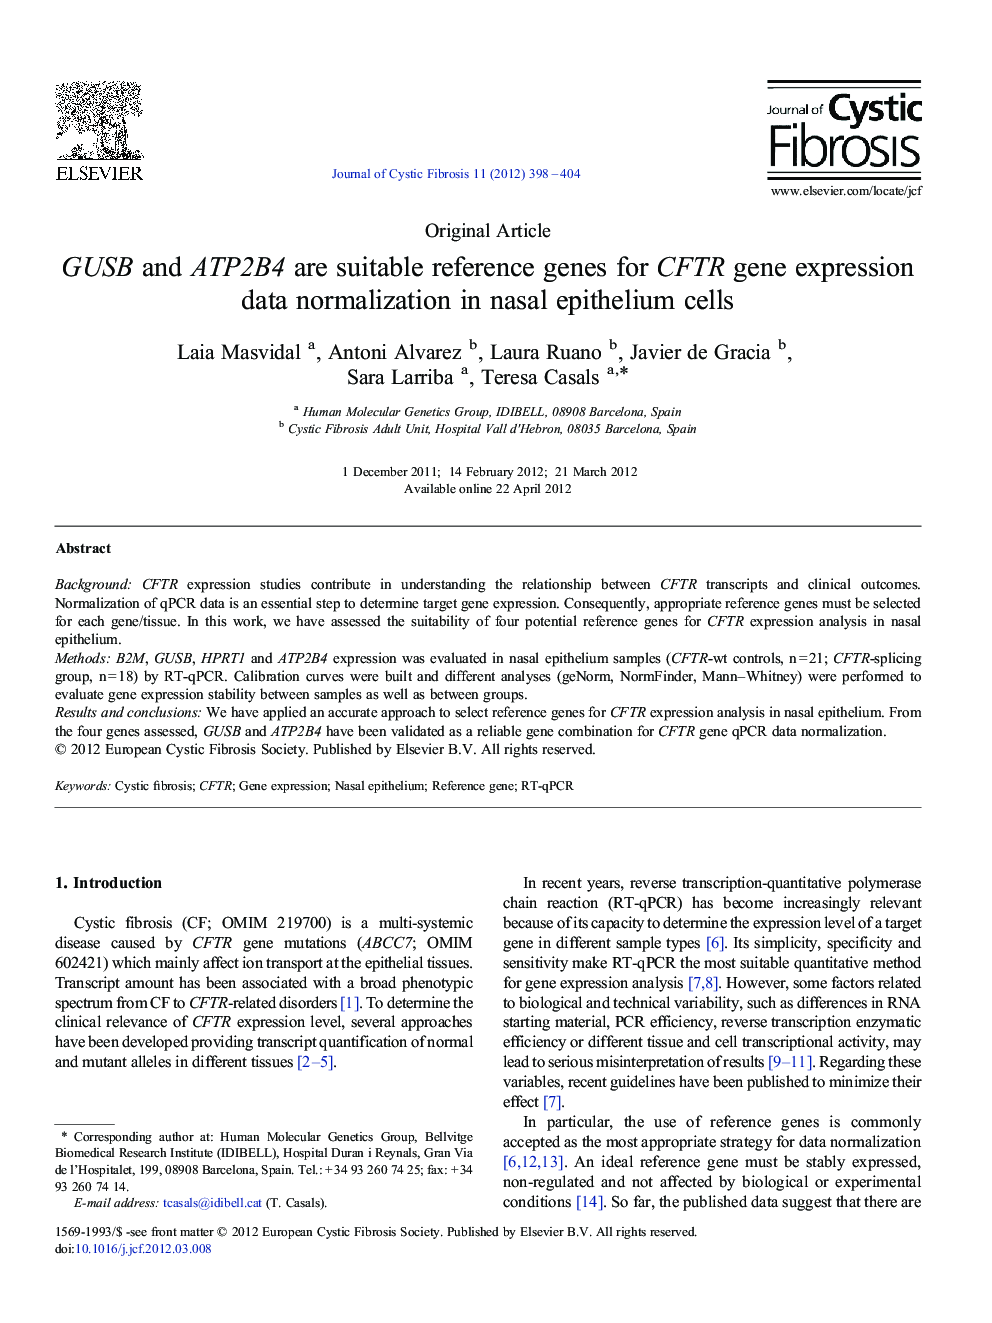 GUSB and ATP2B4 are suitable reference genes for CFTR gene expression data normalization in nasal epithelium cells